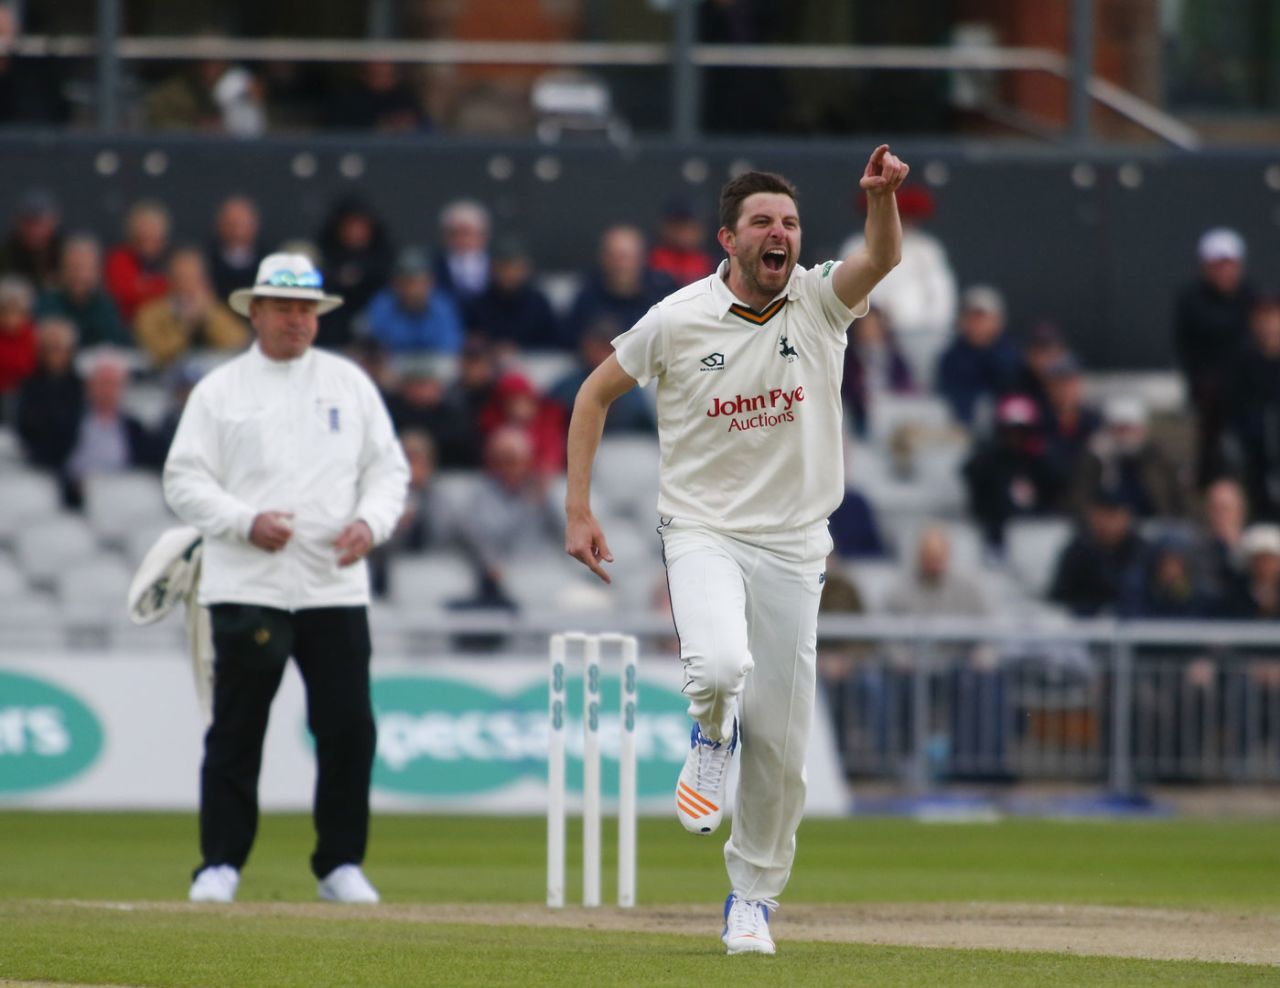 Harry Gurney ripped through the batting to finish with six-for, County Championship, Division One, Old Trafford, 4th day, April 16, 2018